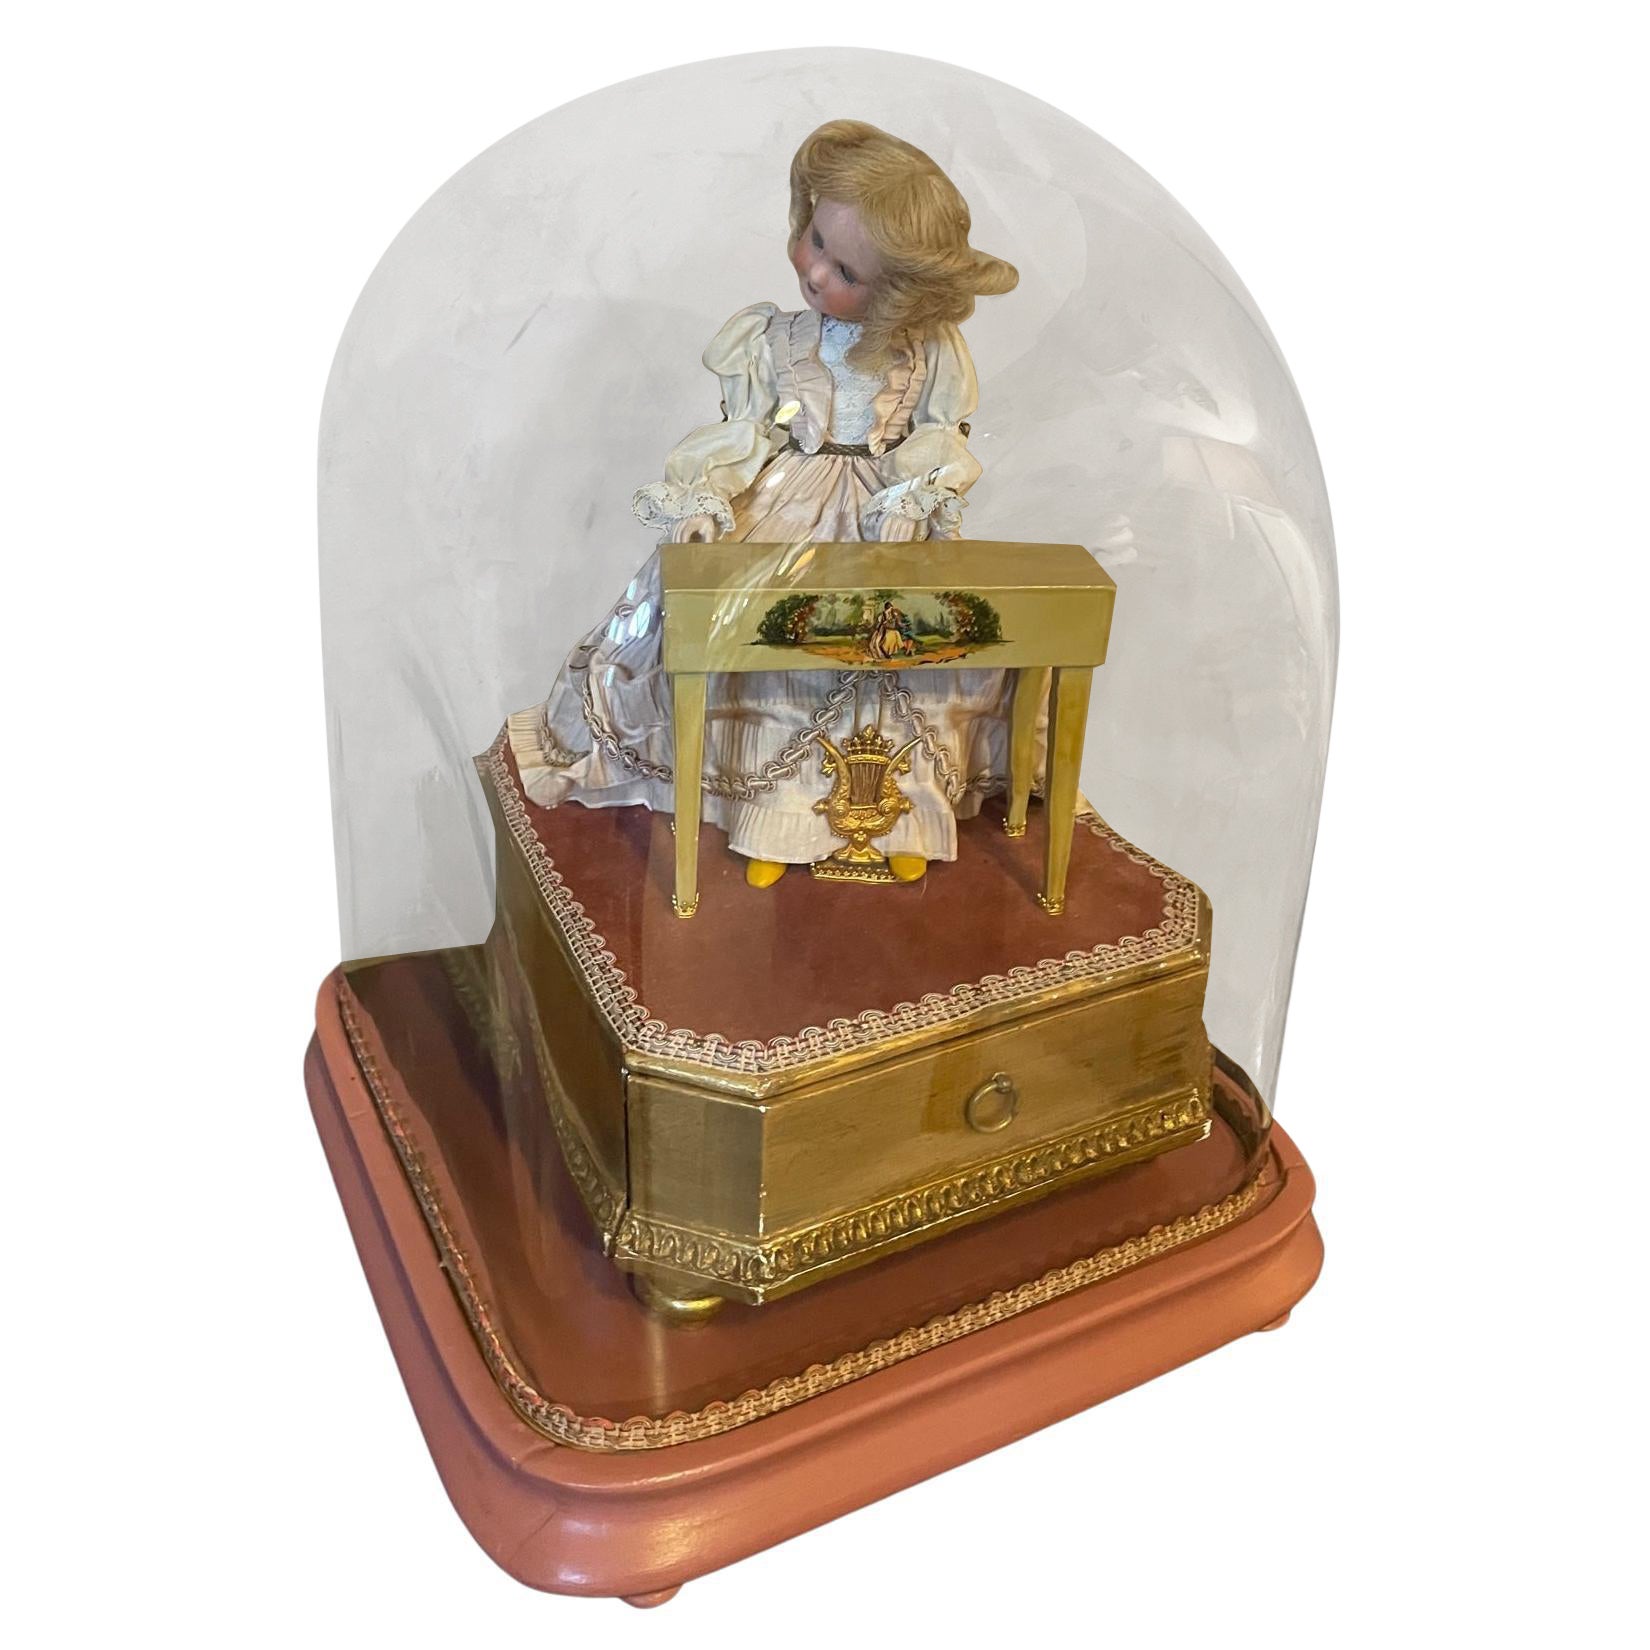 20th Century French Musical Automate by Farkas with Its Dome Glass, 1950s